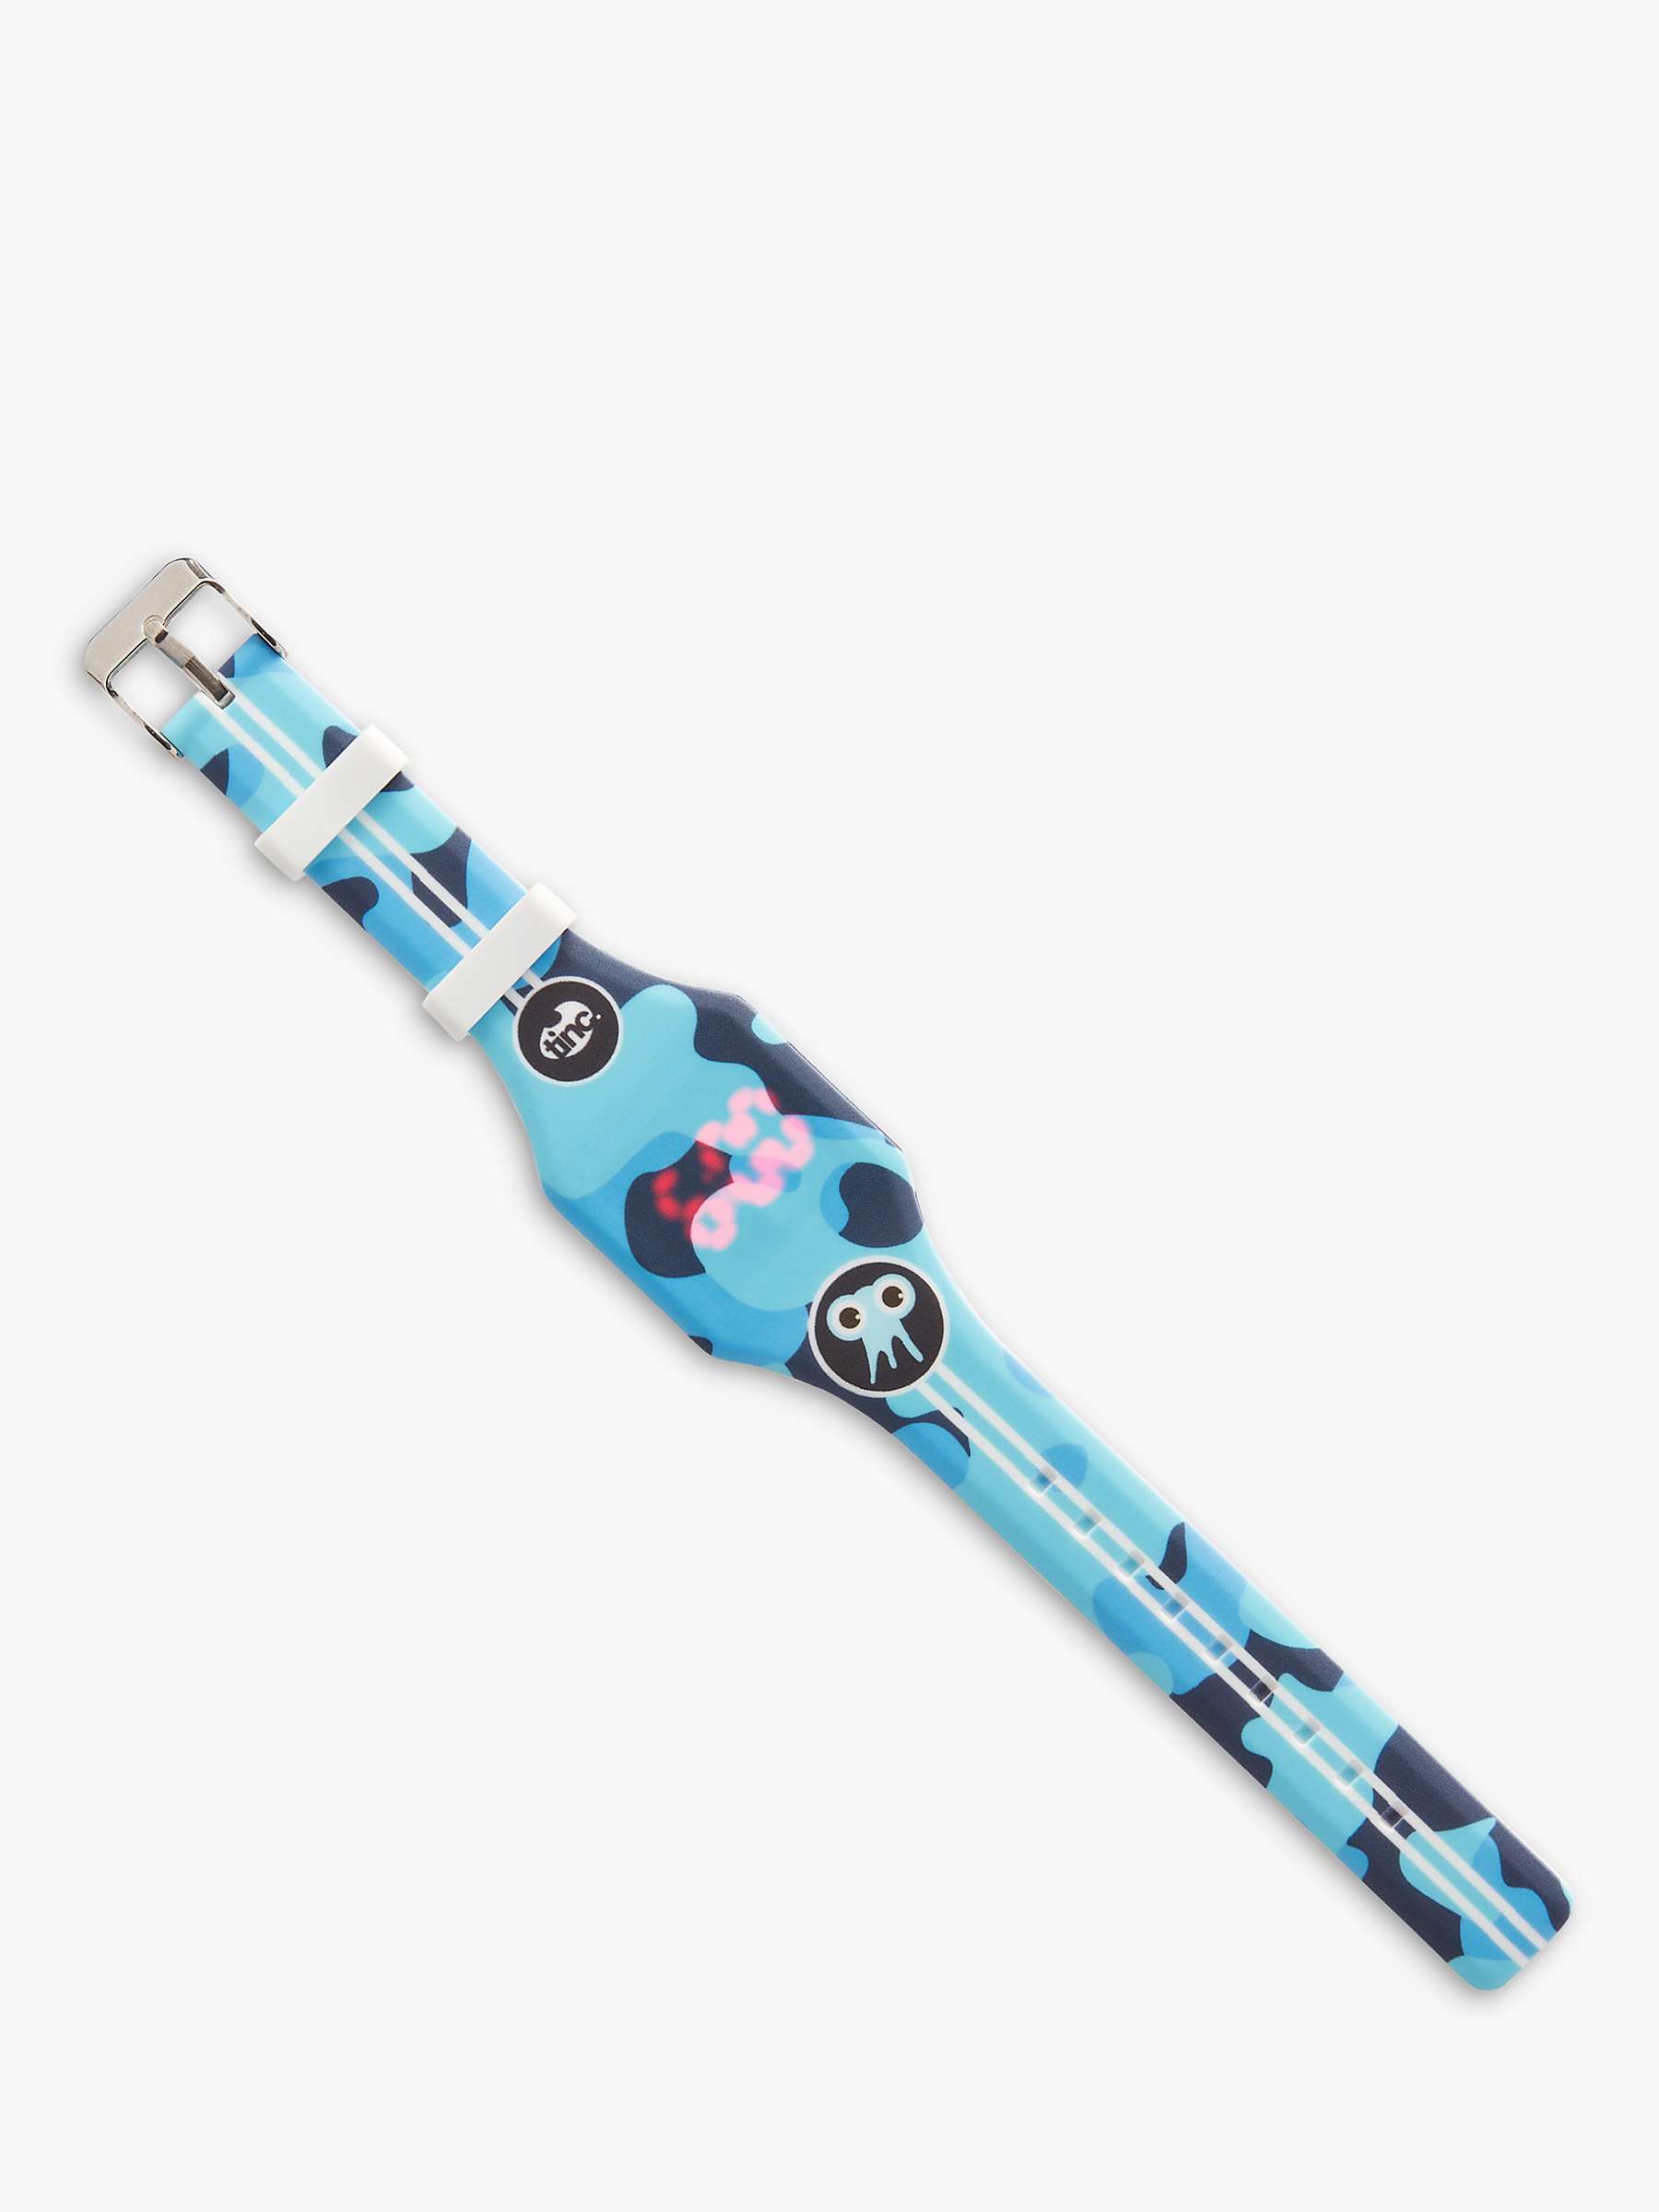 Buy Tinc Kid's Tonkin LED Camouflage Watch, Blue Online at johnlewis.com